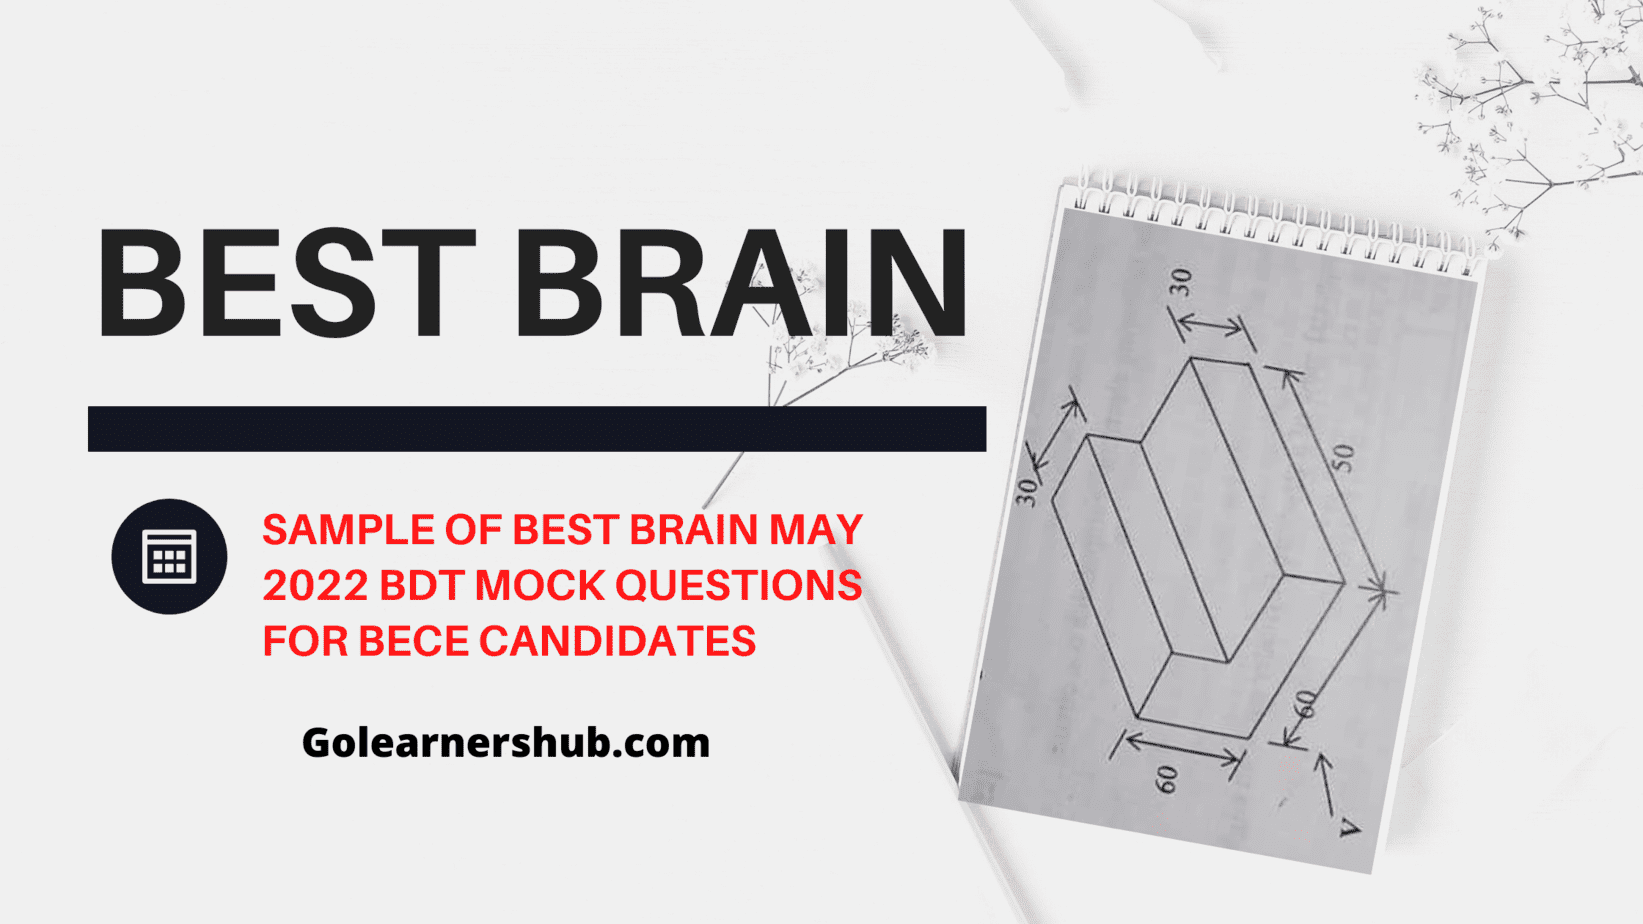 Sample of Best Brain May 2022 BDT Mock Questions For BECE Candidates